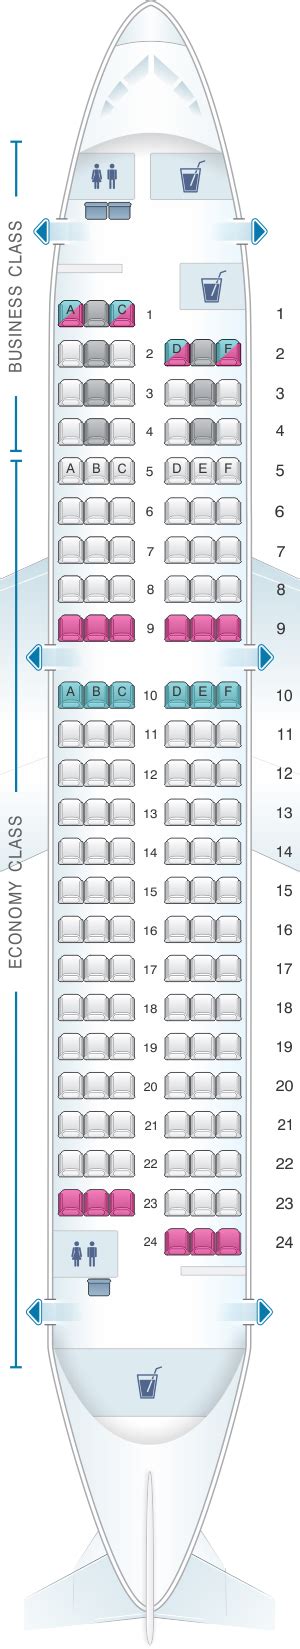 Airbus Industrie A319 Seat Map